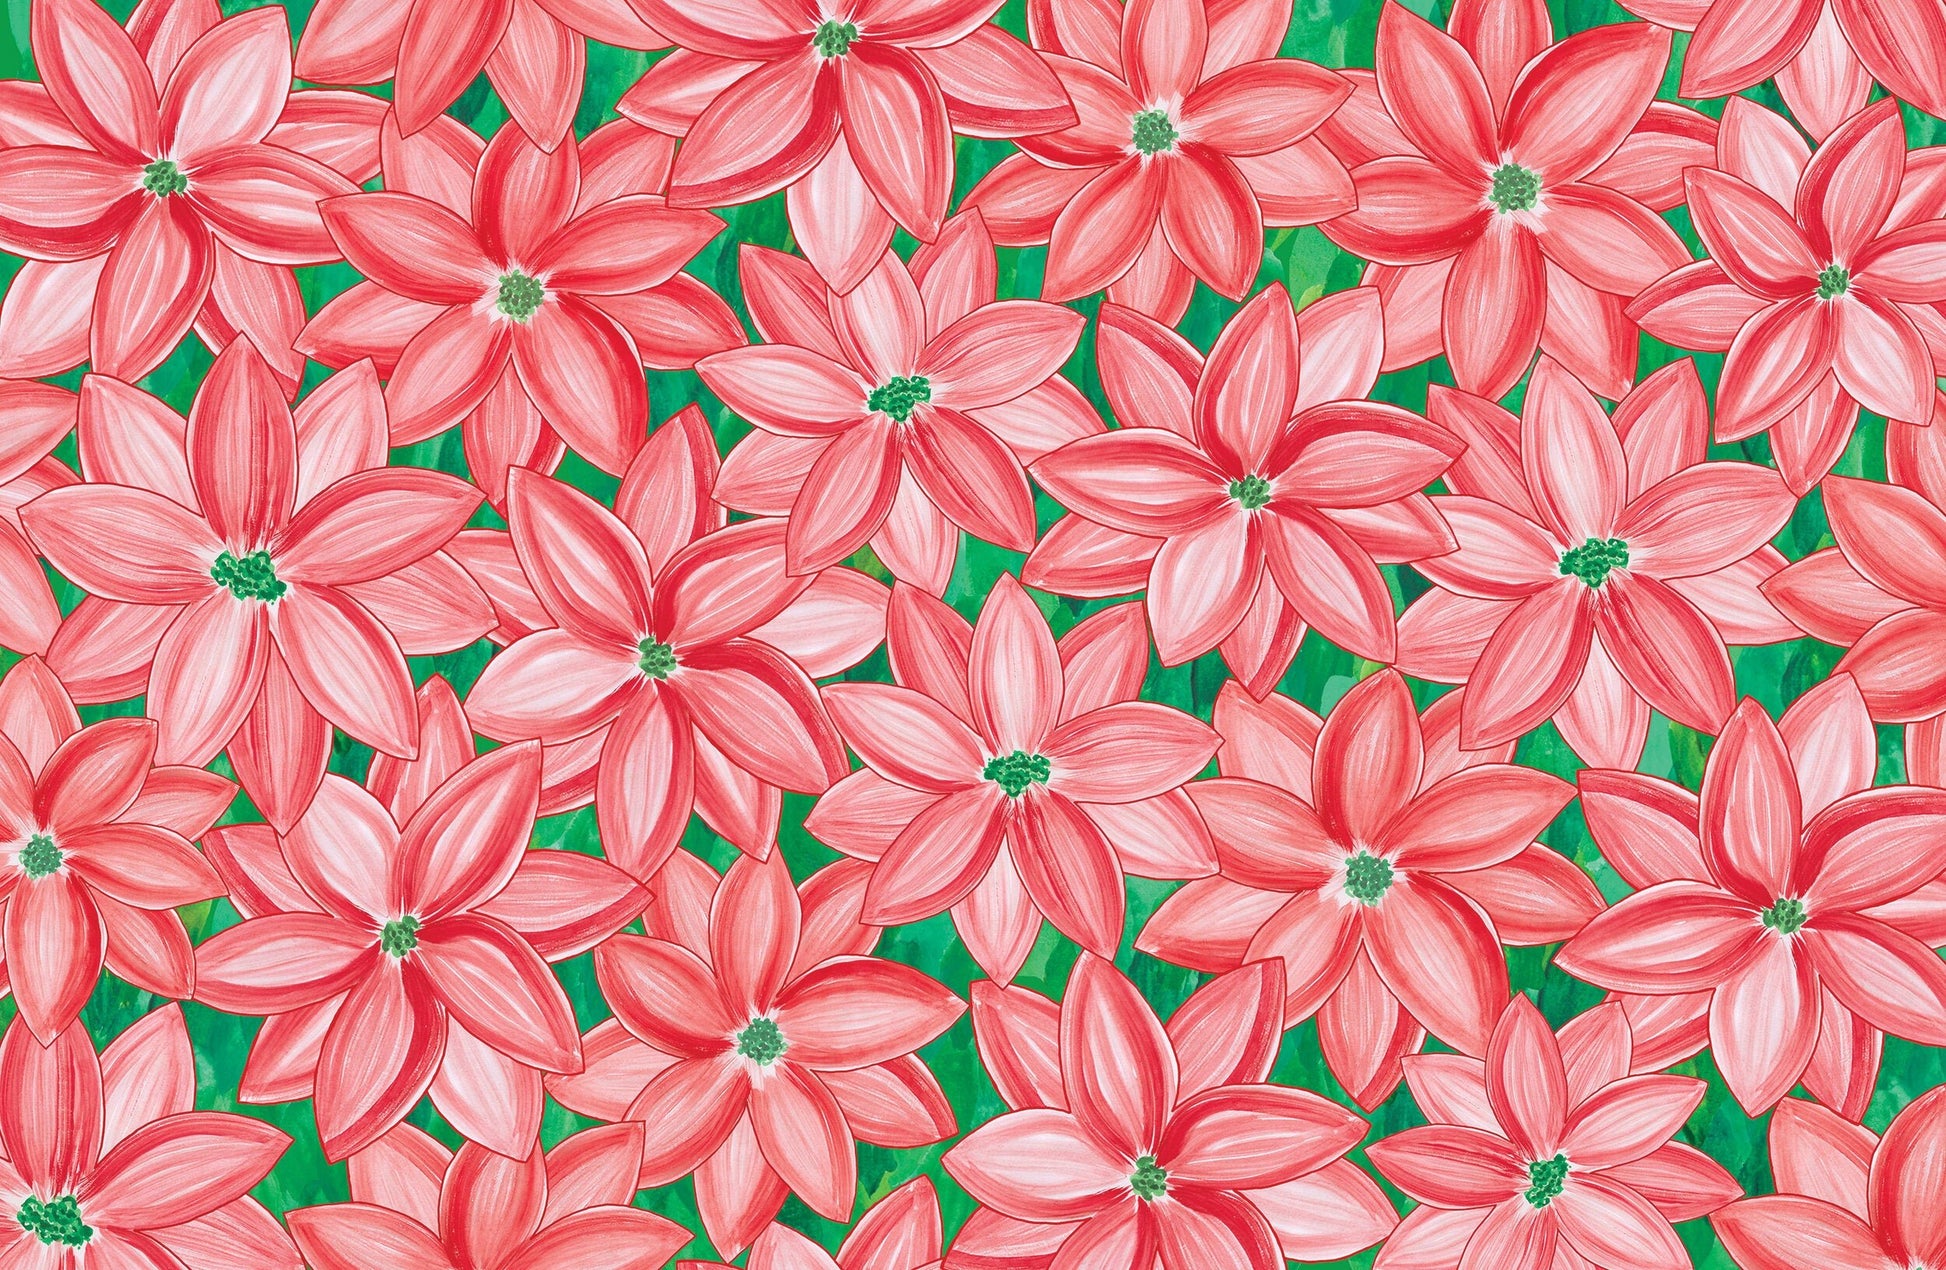 Poinsettia patterned paper placemat